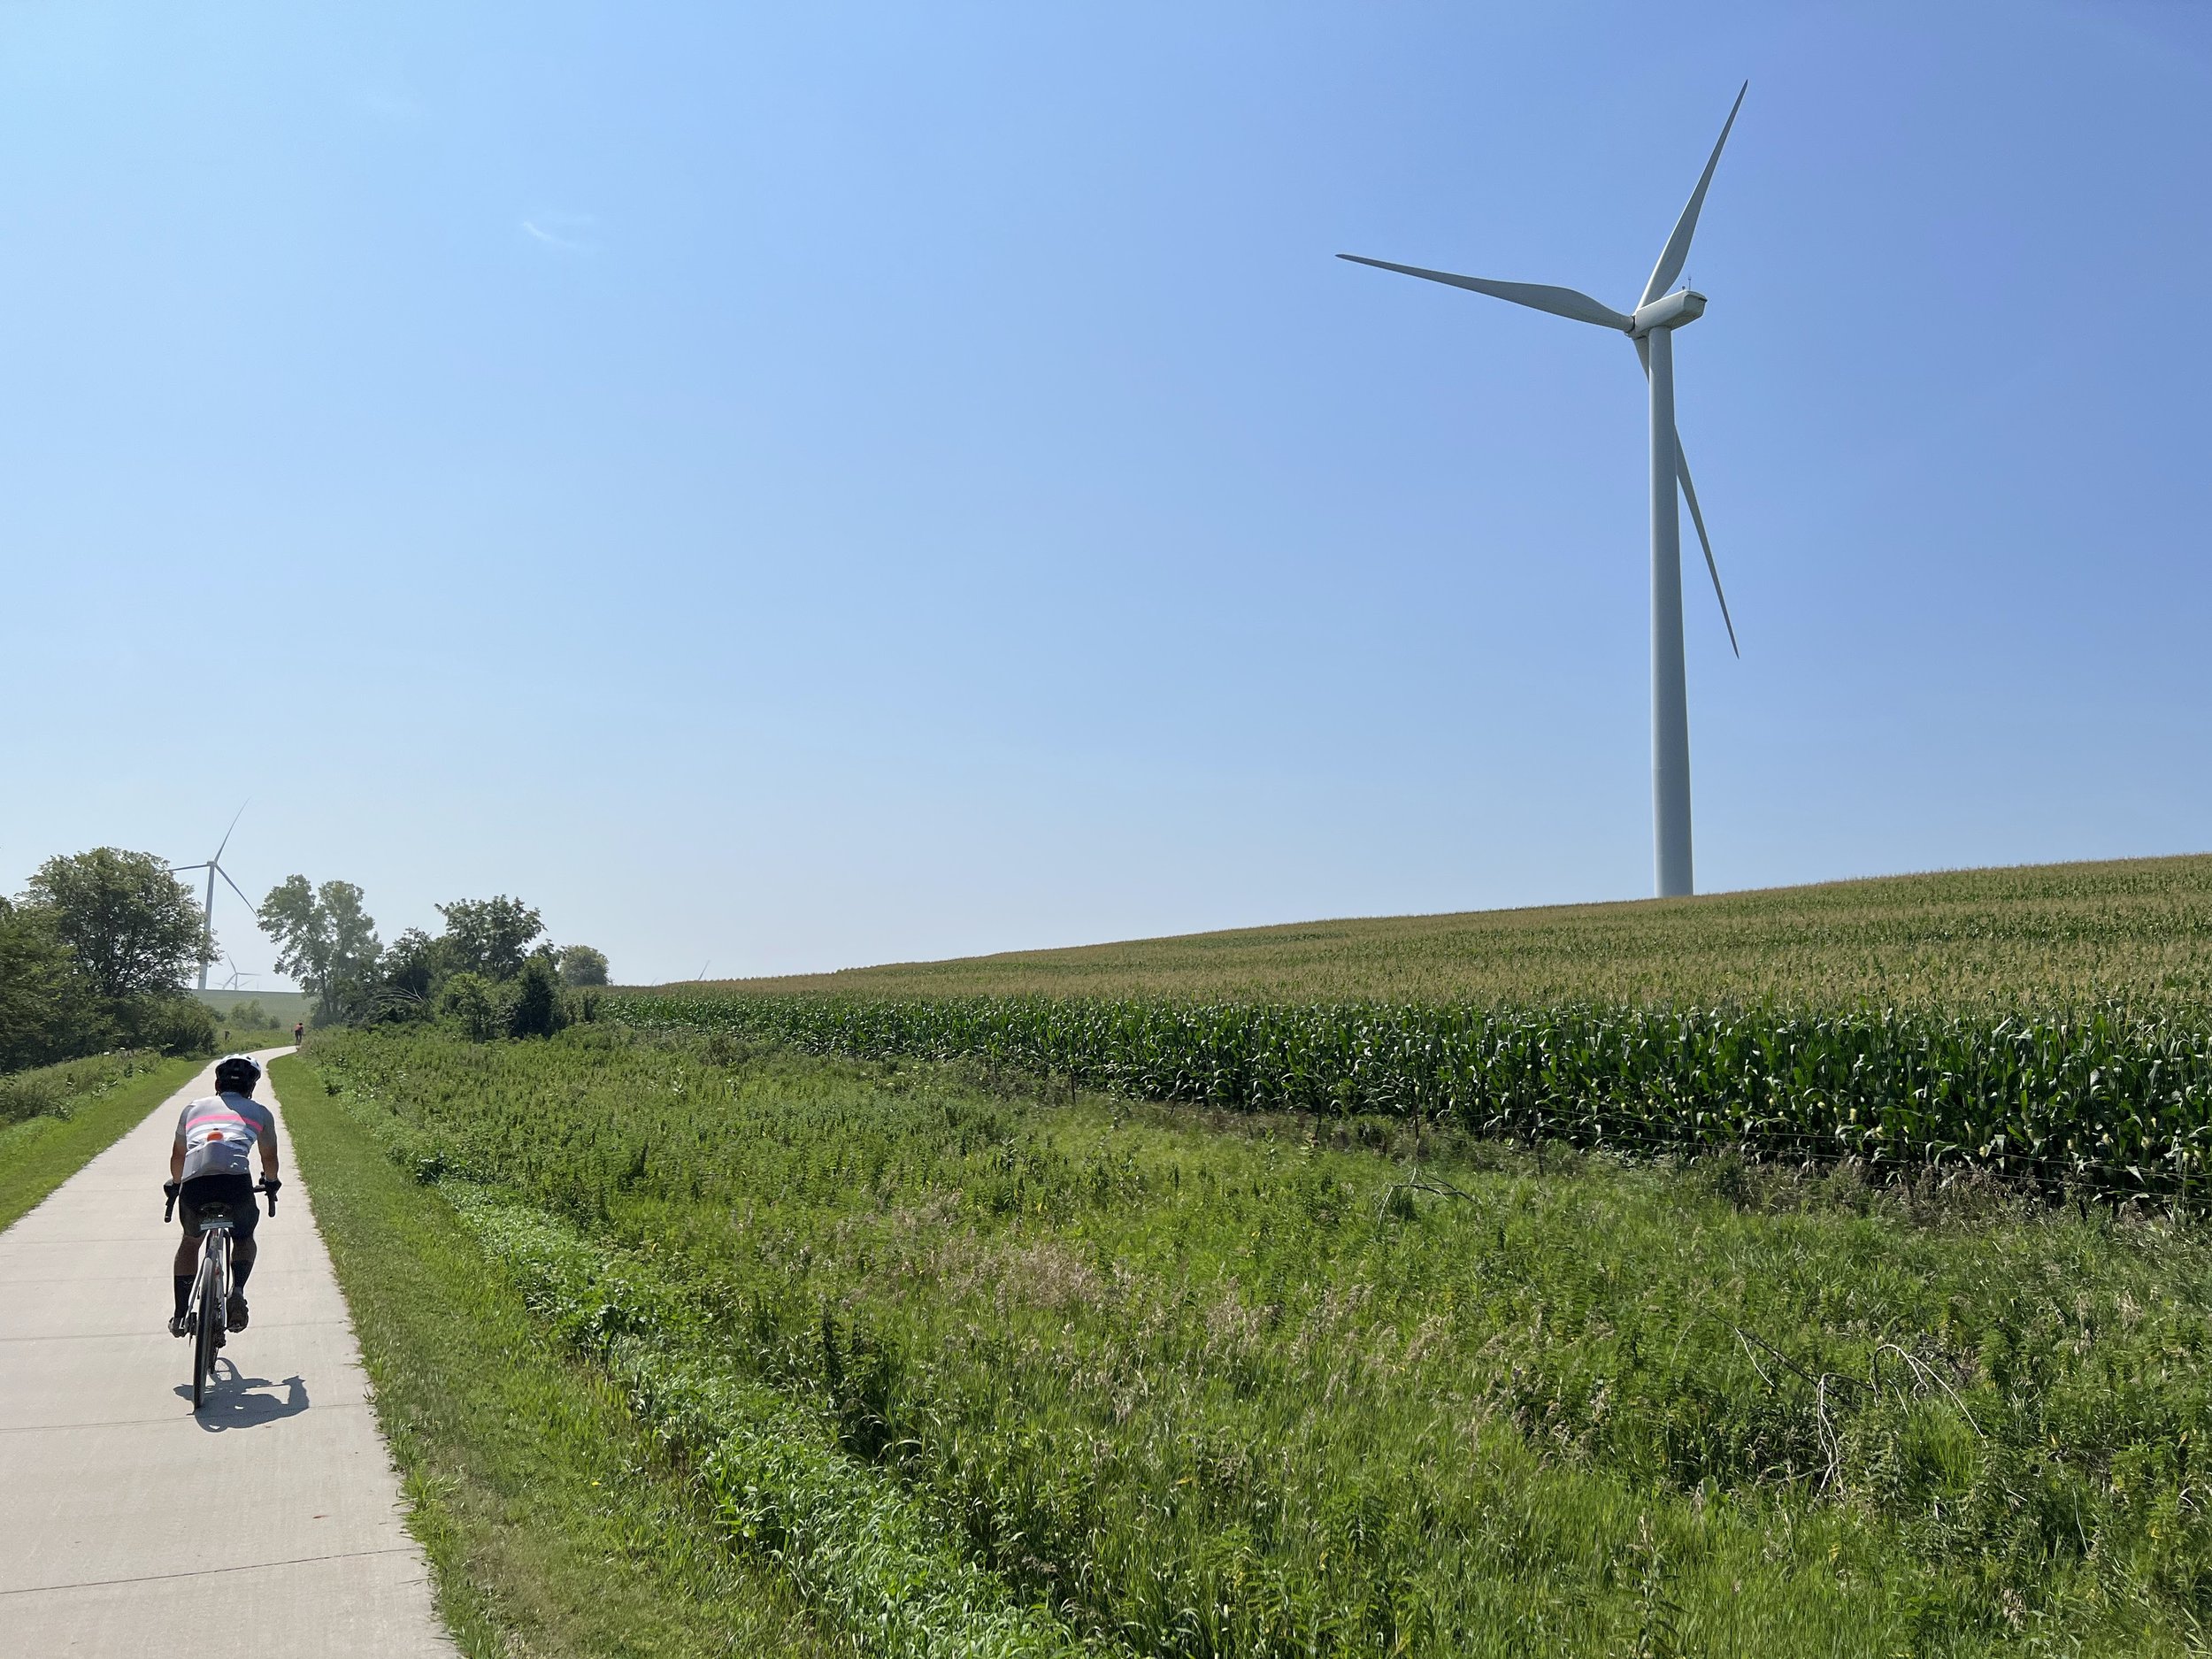  corn and wind farms 